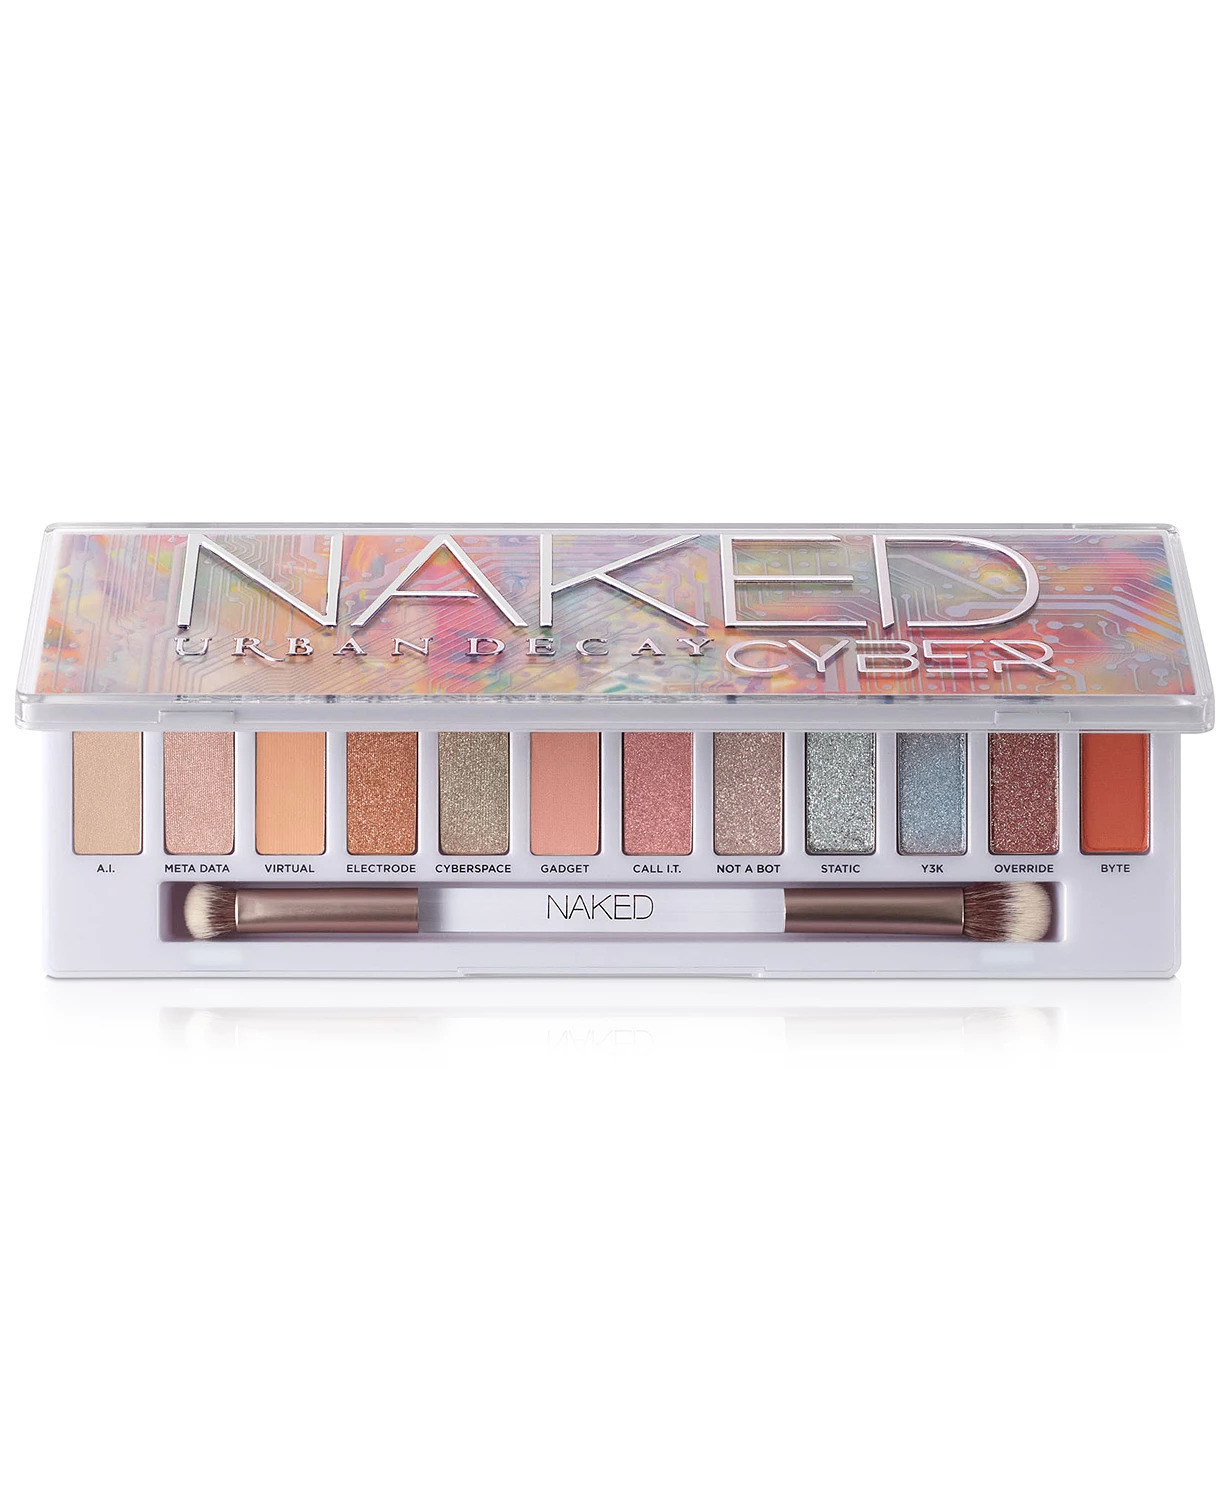 12-Shade Urban Decay Naked Cyber Eyeshadow Palette w/ Brush for $24.5